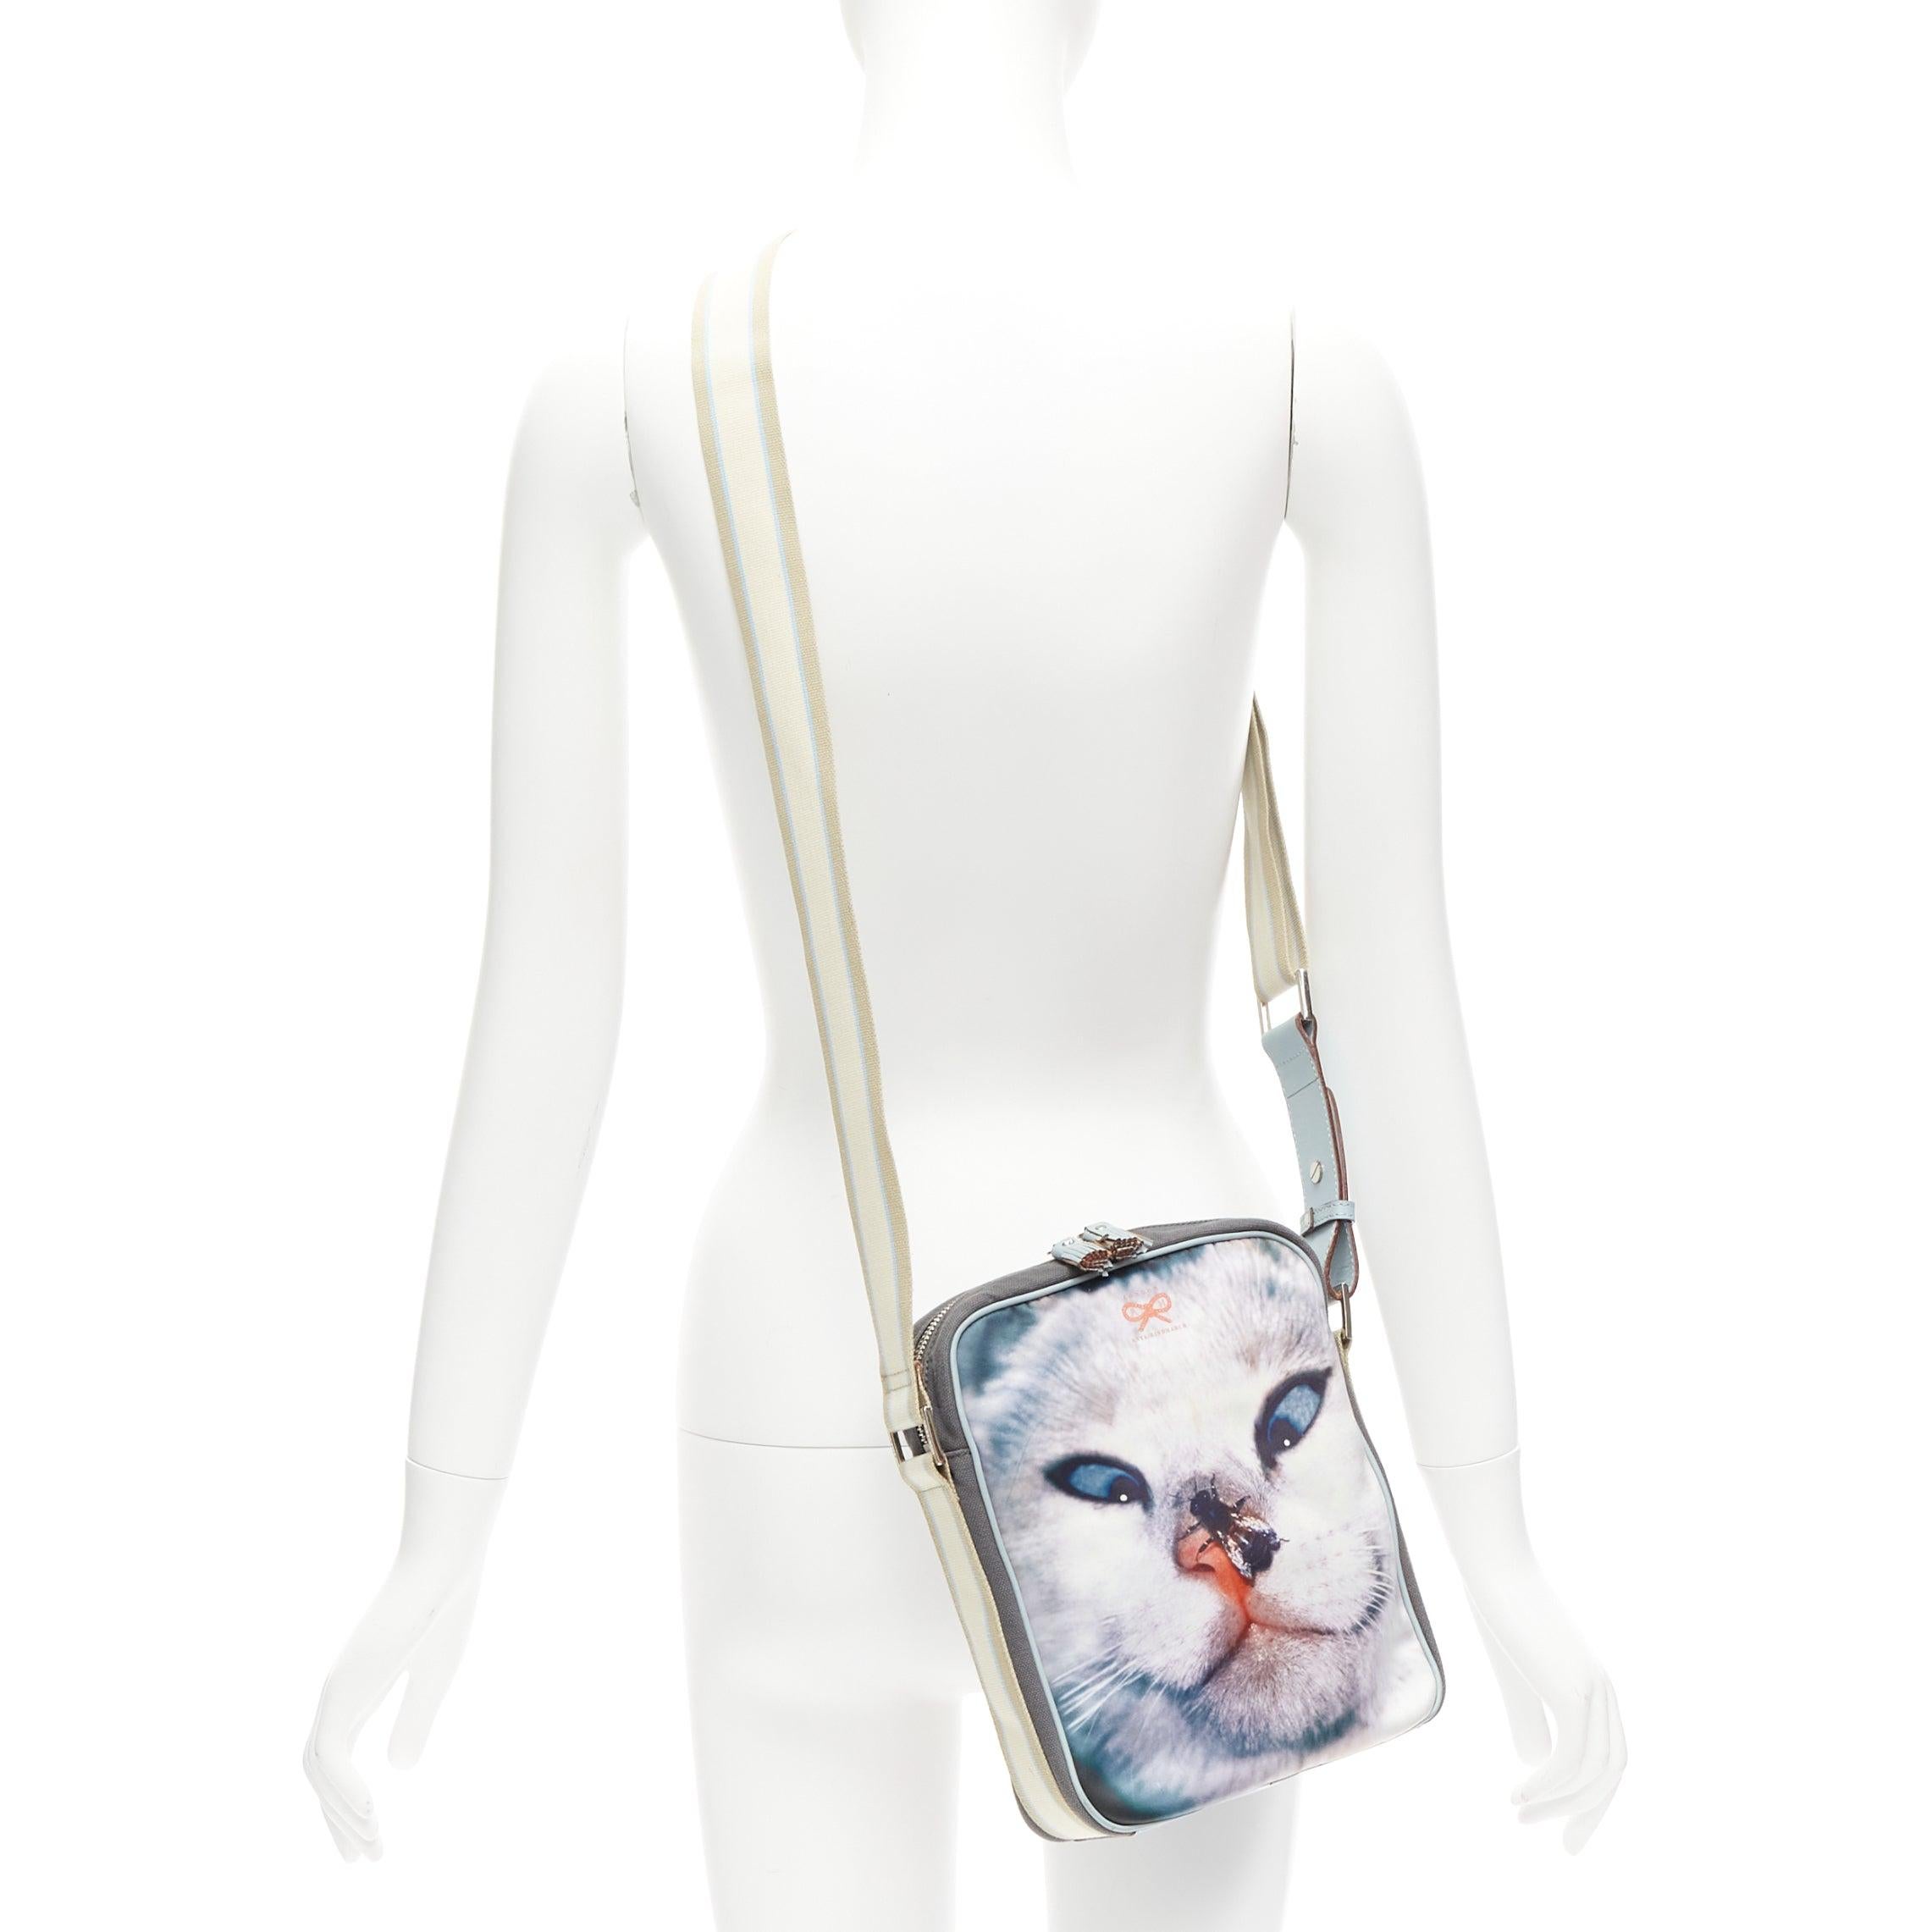 ANYA HINDMARCH blue cross eyed cat fly crossbody messenger bag
Reference: ANWU/A01073
Brand: Anya Hindmarch
Material: Fabric, Leather
Color: Blue, Multicolour
Pattern: Photographic Print
Closure: Zip
Lining: Beige Leather
Extra Details: Cat print at